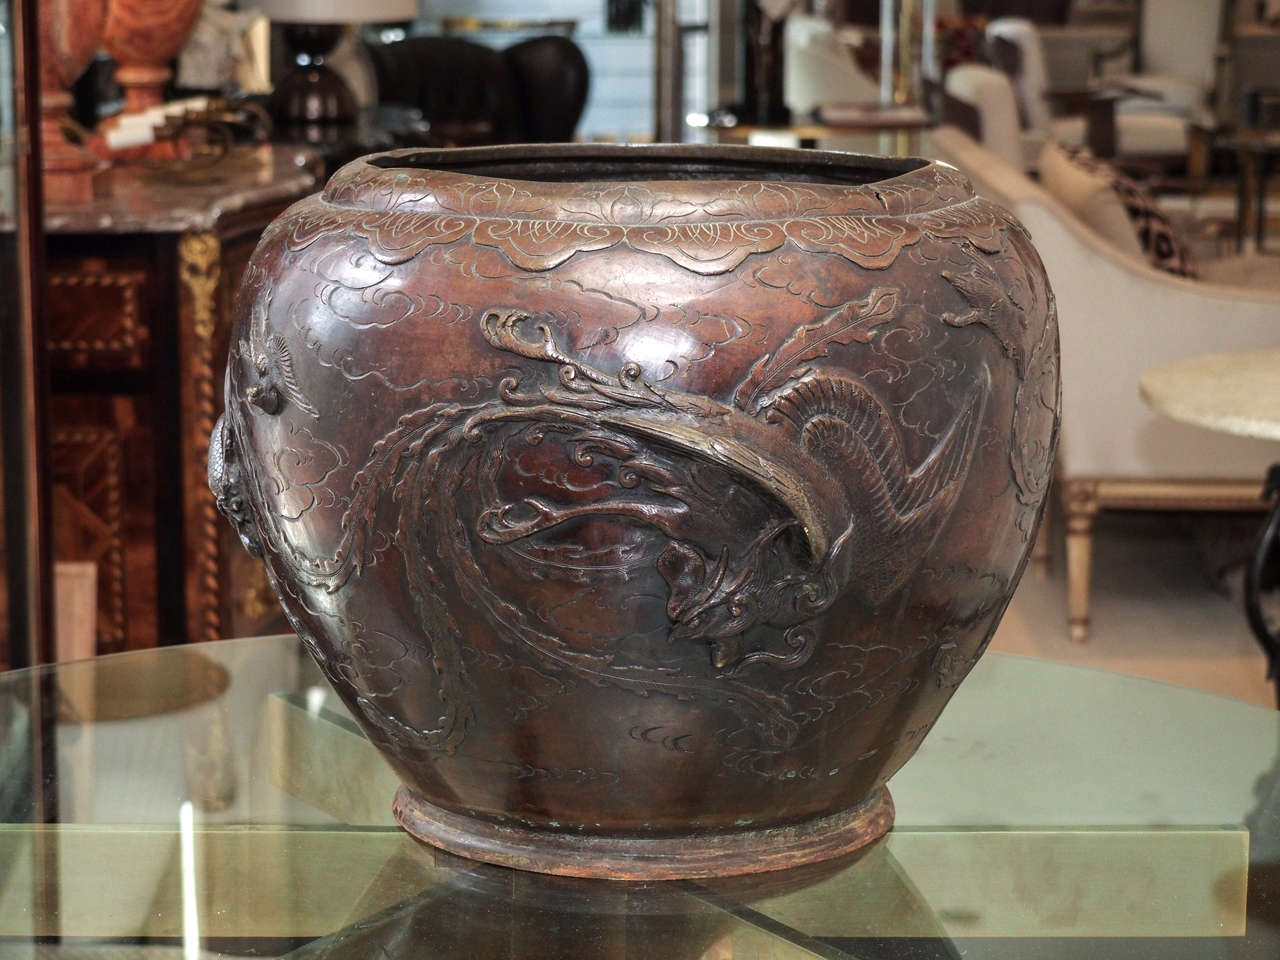 Attractive large cast bronze jardinière, probably Asian in origin, adorned with birds careening amongst the clouds